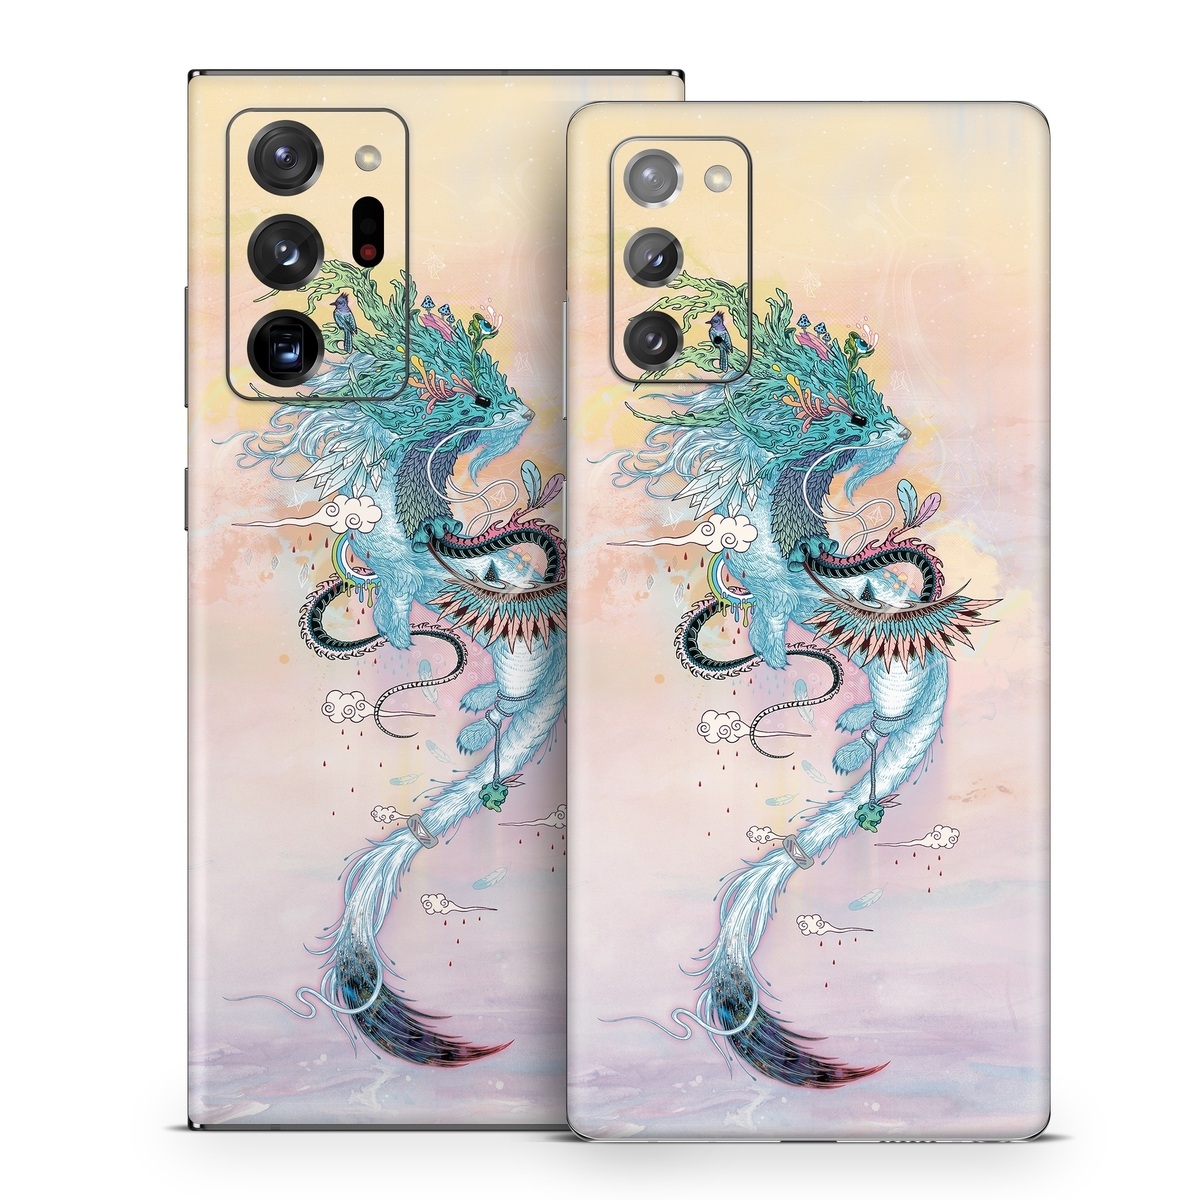 Samsung Galaxy Note 20 Series Skin design of Illustration, Water, Watercolor paint, Art, Fictional character, Graphic design, Mythology, Visual arts, Painting, Drawing, with yellow, pink, blue, green colors